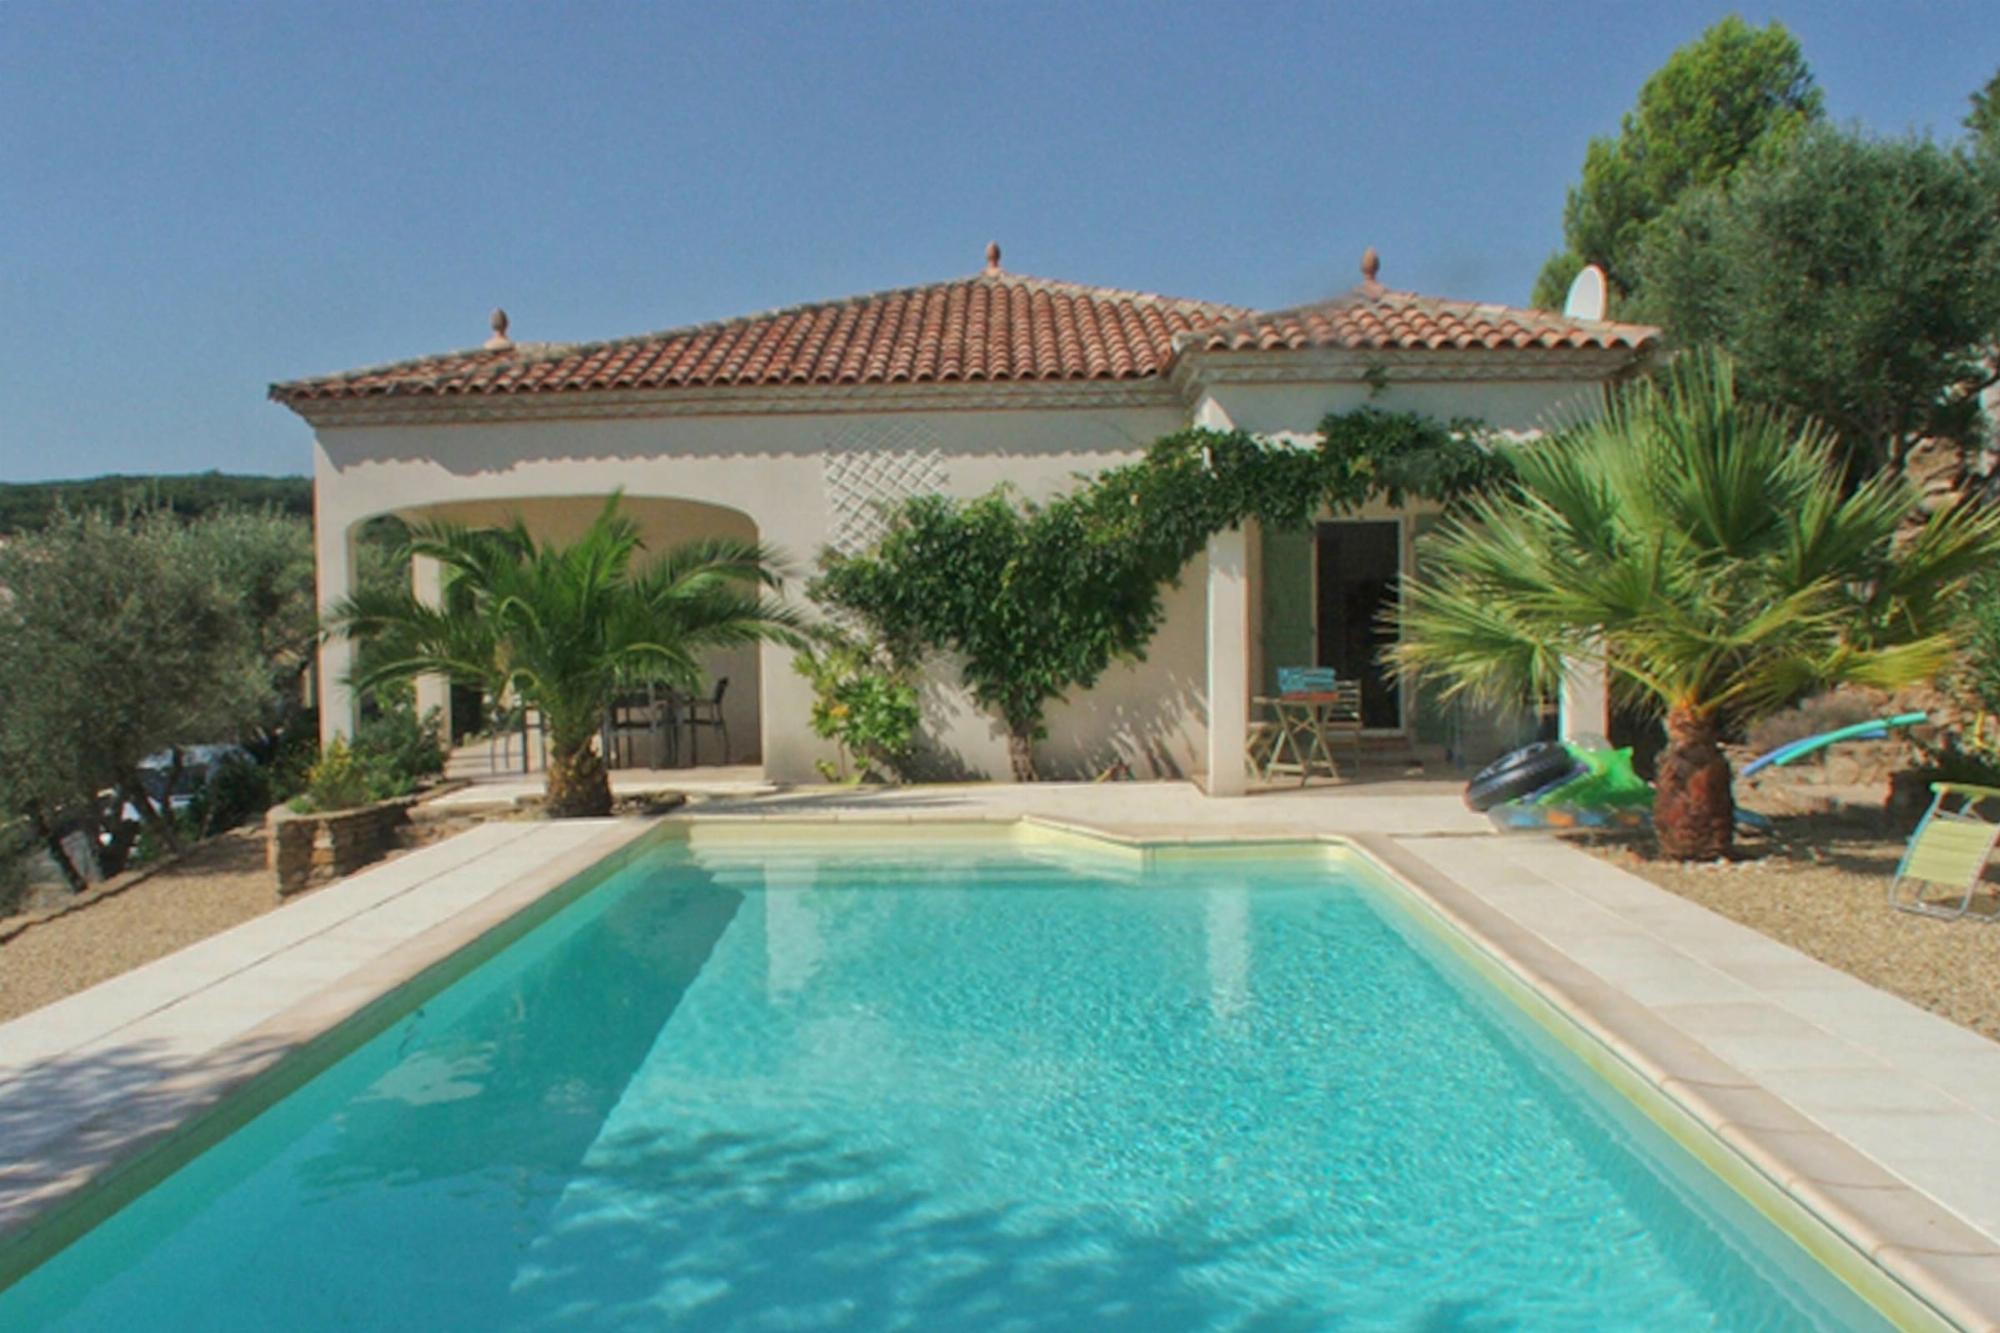 Holiday rentals in Languedoc / Occitanie region of France